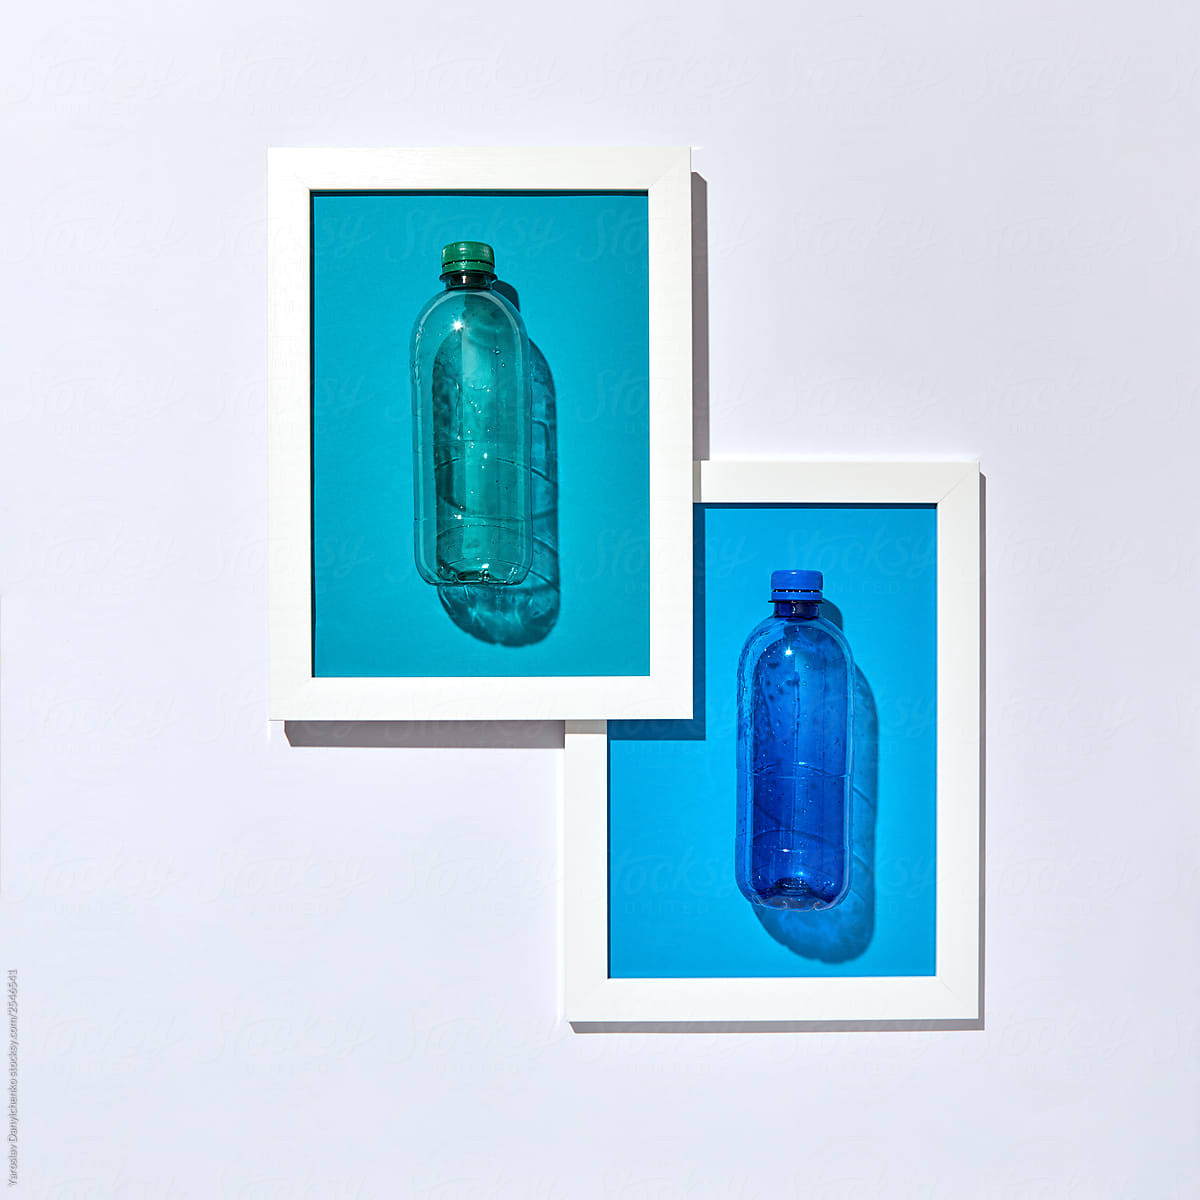 Two plastic bottles in a frame on a light background